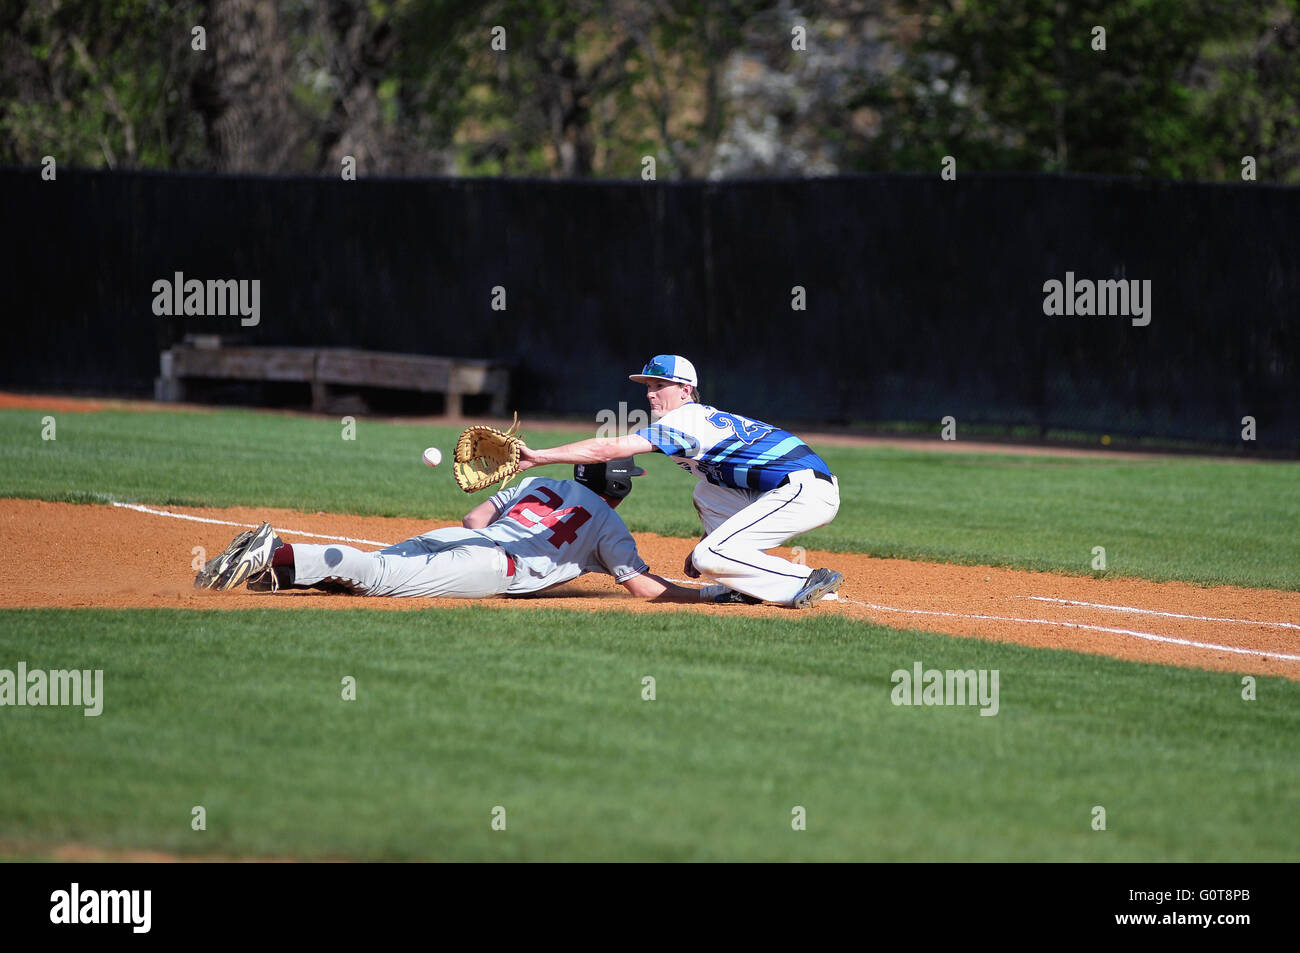 First baseman taking a pick-off throw from his pitcher as dives back safely to first base during a high school baseball game. USA. Stock Photo